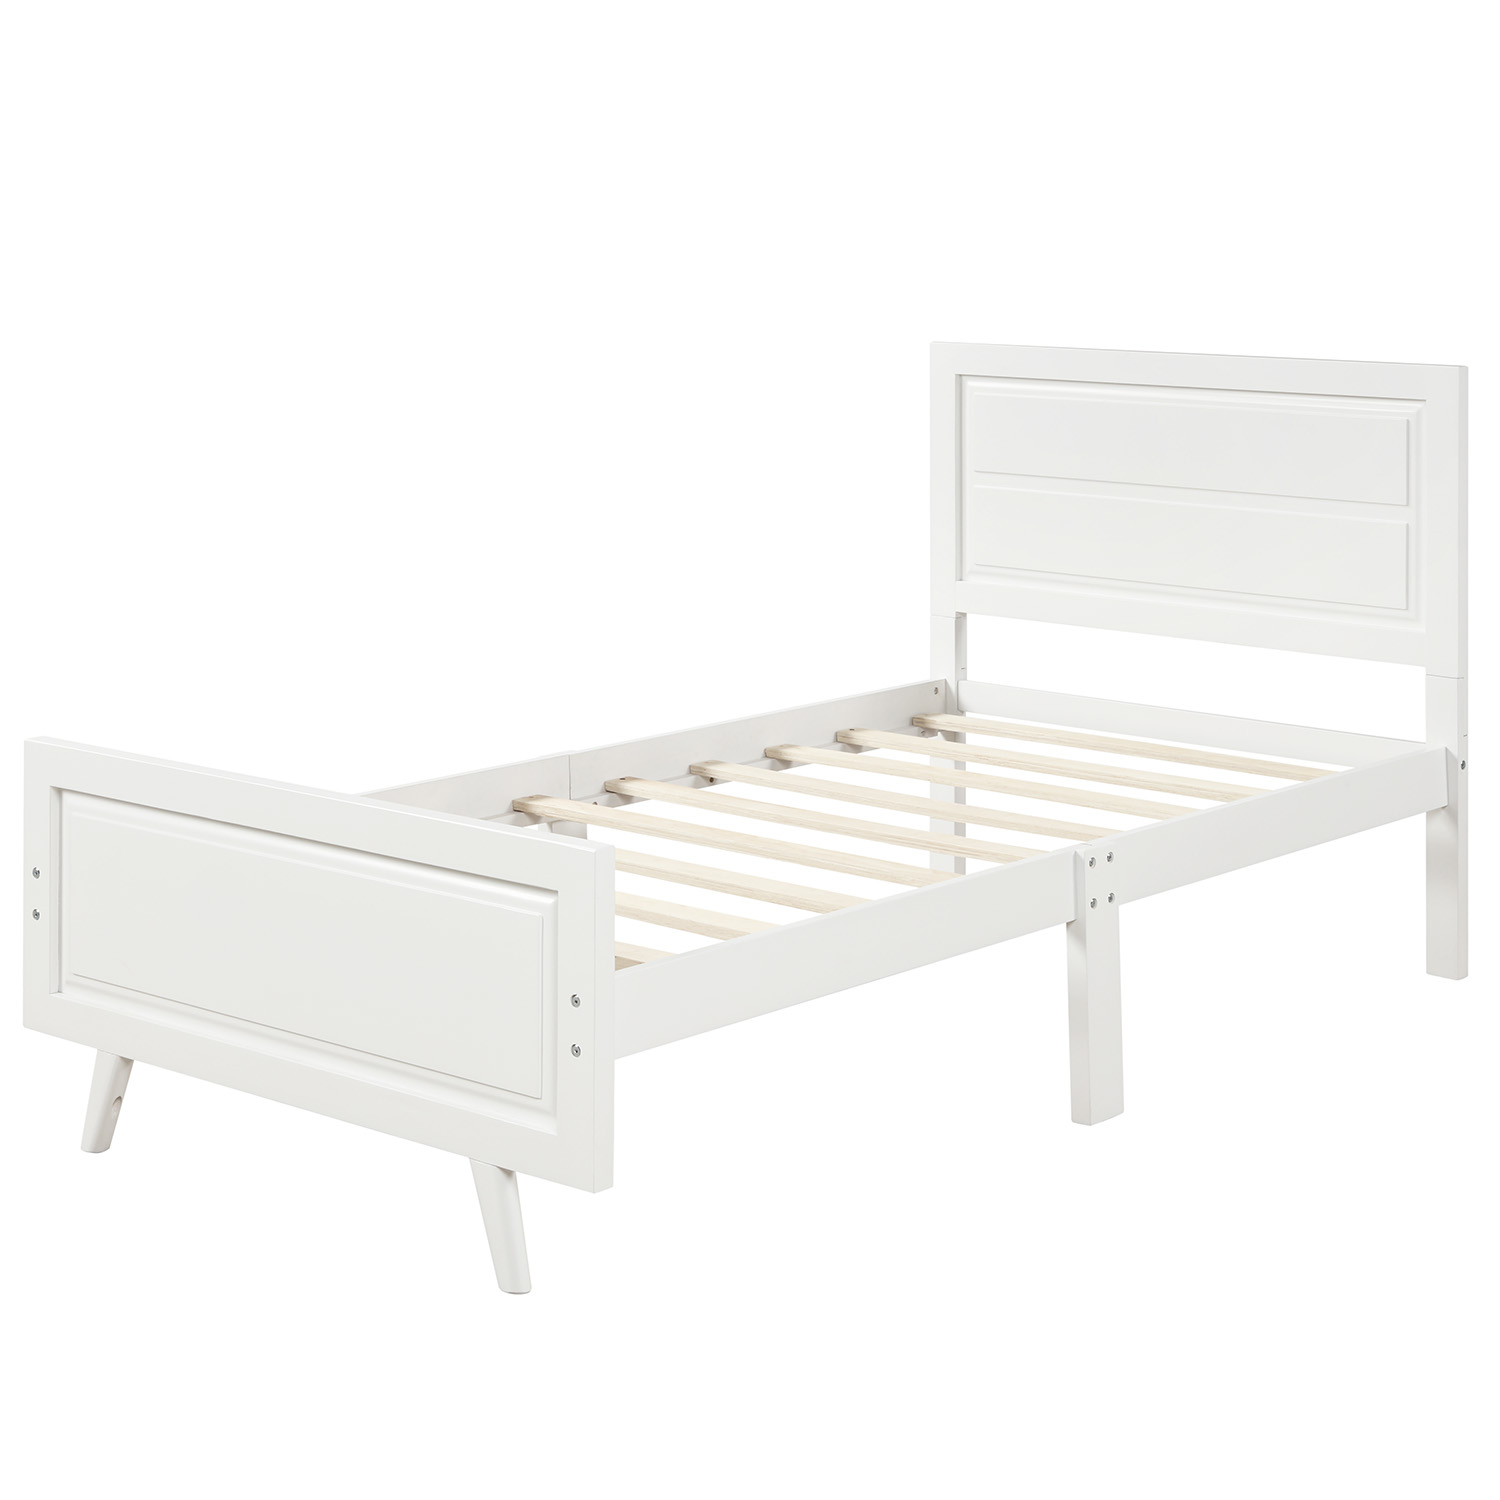 Twin Bed Frame with Headboard, Wood Single Bed Frame Wood Platform Bed, Twin Single Bed Frame w/ Wood Slat, Twin Platform Bed Frame for Kids, Platform Twin Bed Frame No Box Spring Needed, White, R108 - image 2 of 6